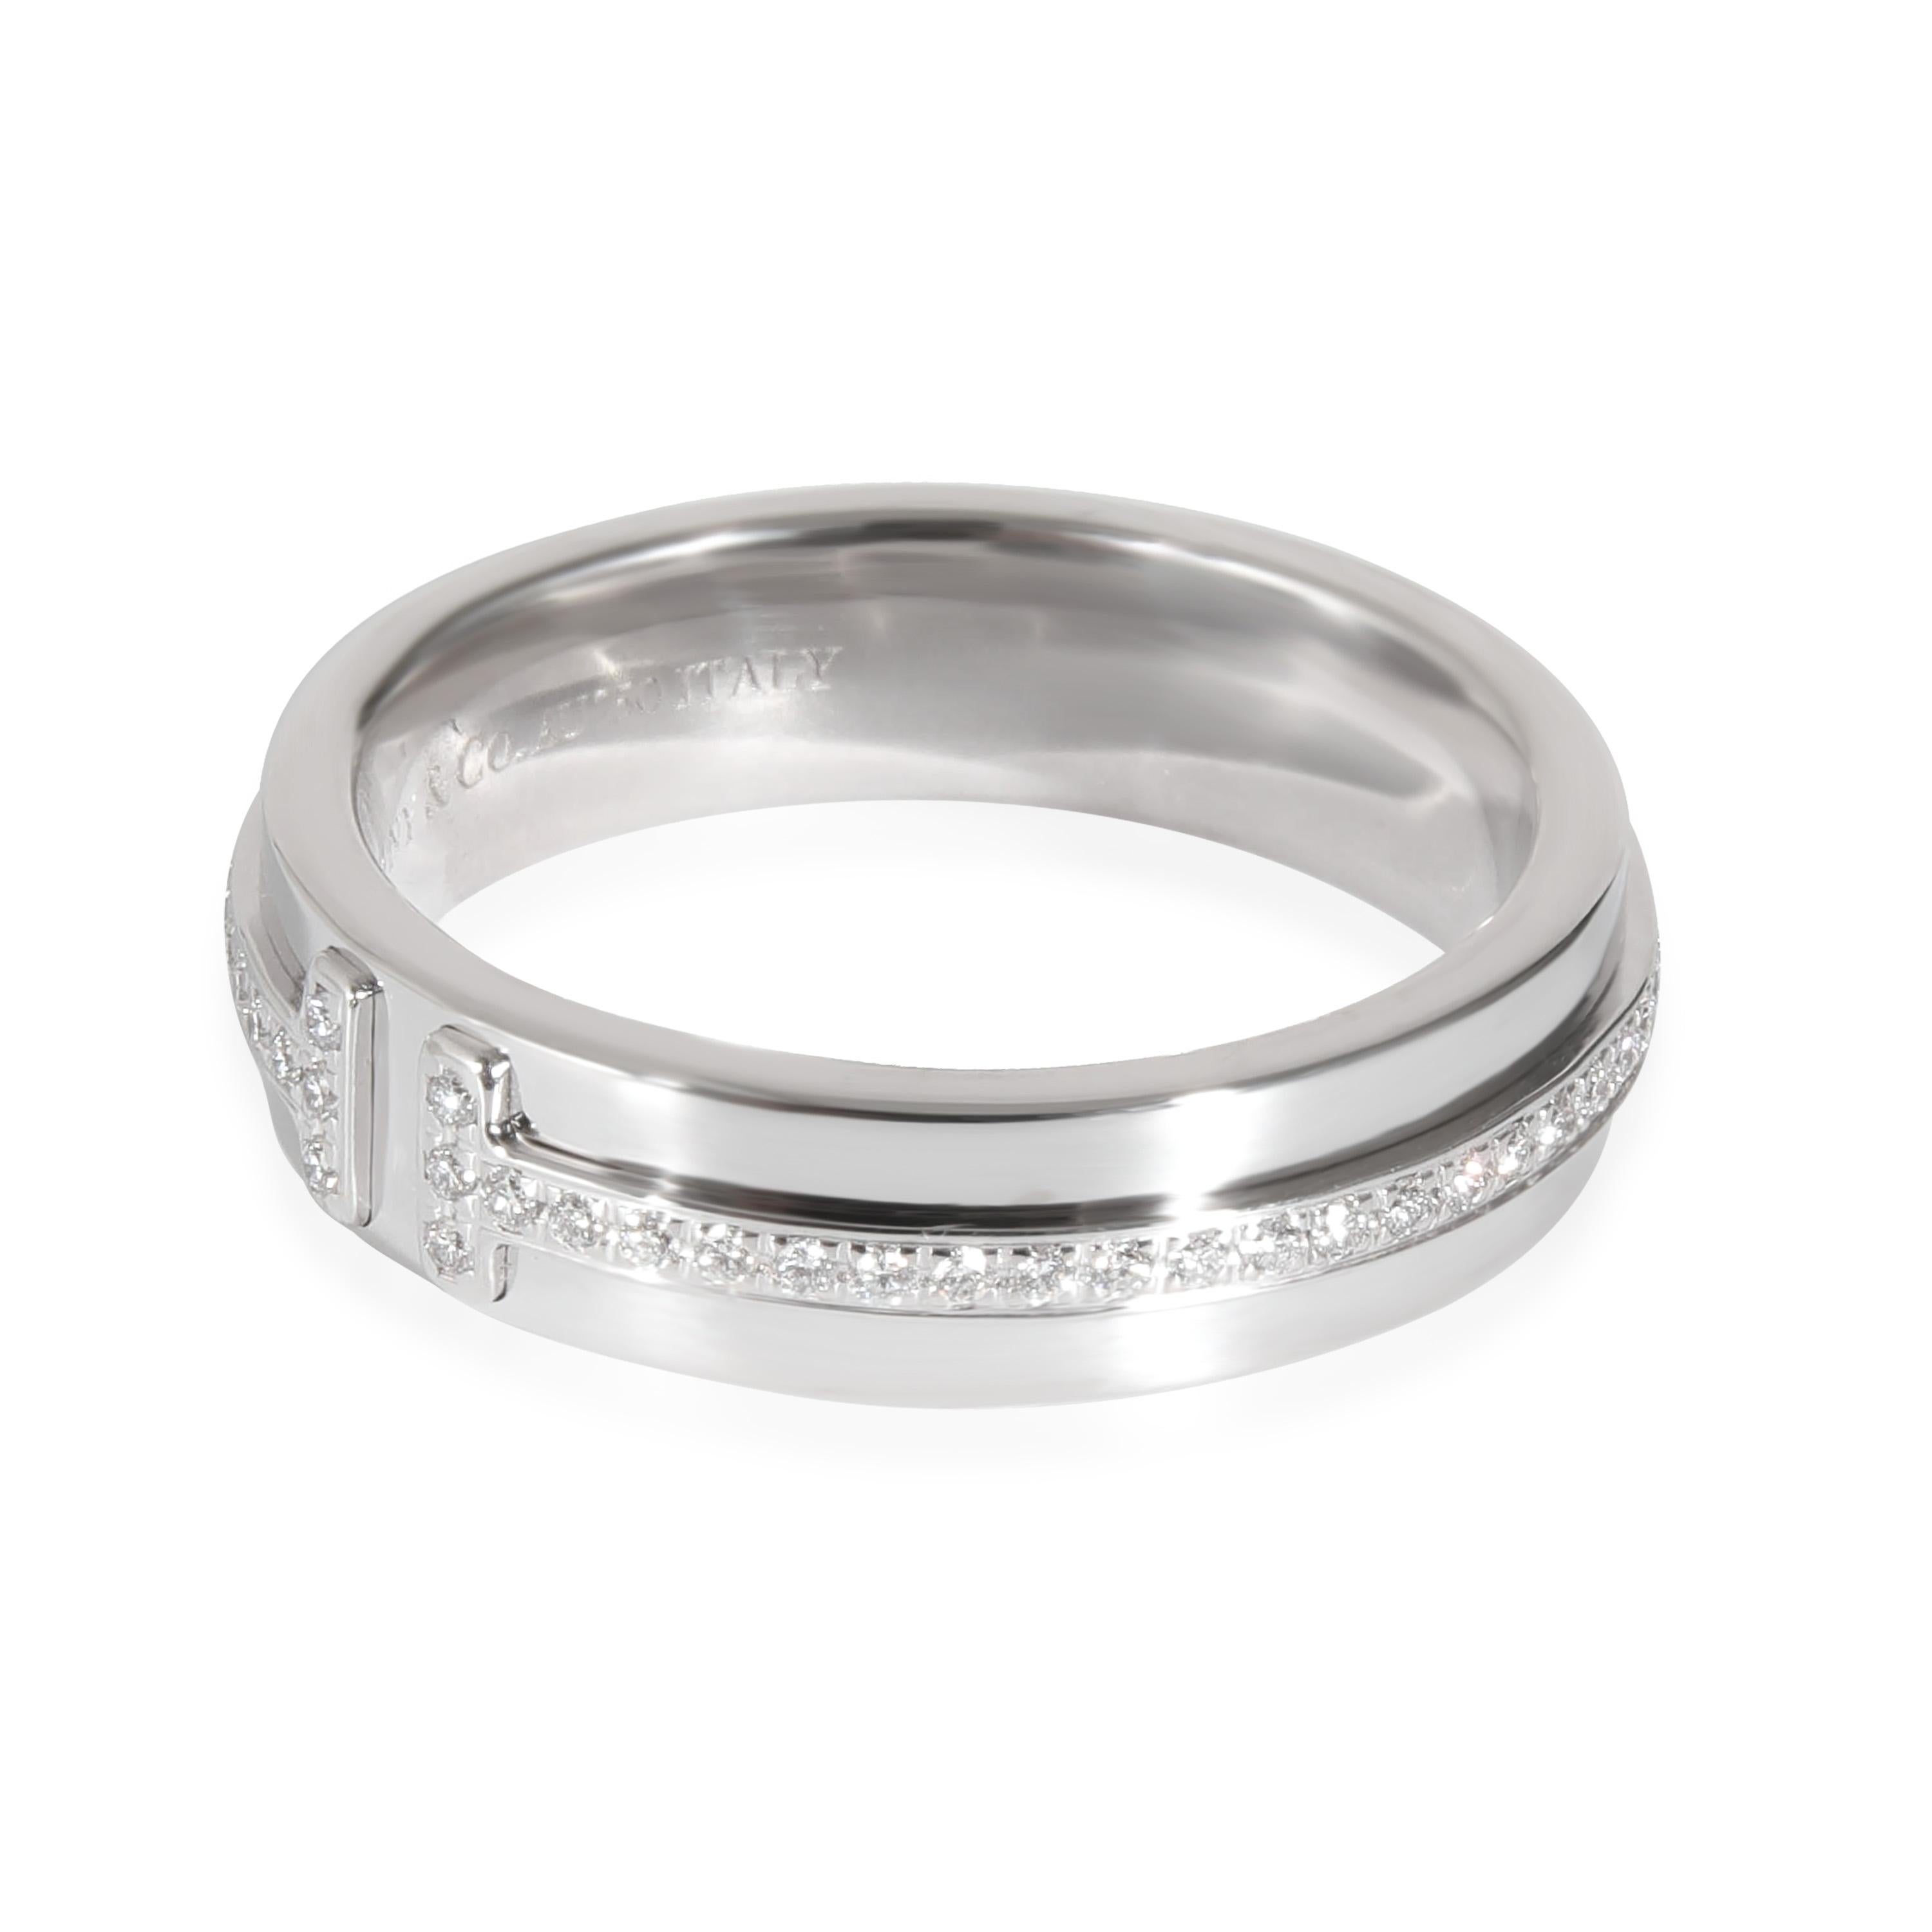 Tiffany & Co. Tiffany T Narrow Diamond Ring in 18k White Gold 0.13 CTW

PRIMARY DETAILS
SKU: 131373
Listing Title: Tiffany & Co. Tiffany T Narrow Diamond Ring in 18k White Gold 0.13 CTW
Condition Description: Inspired by the 'T' motif that Tiffany